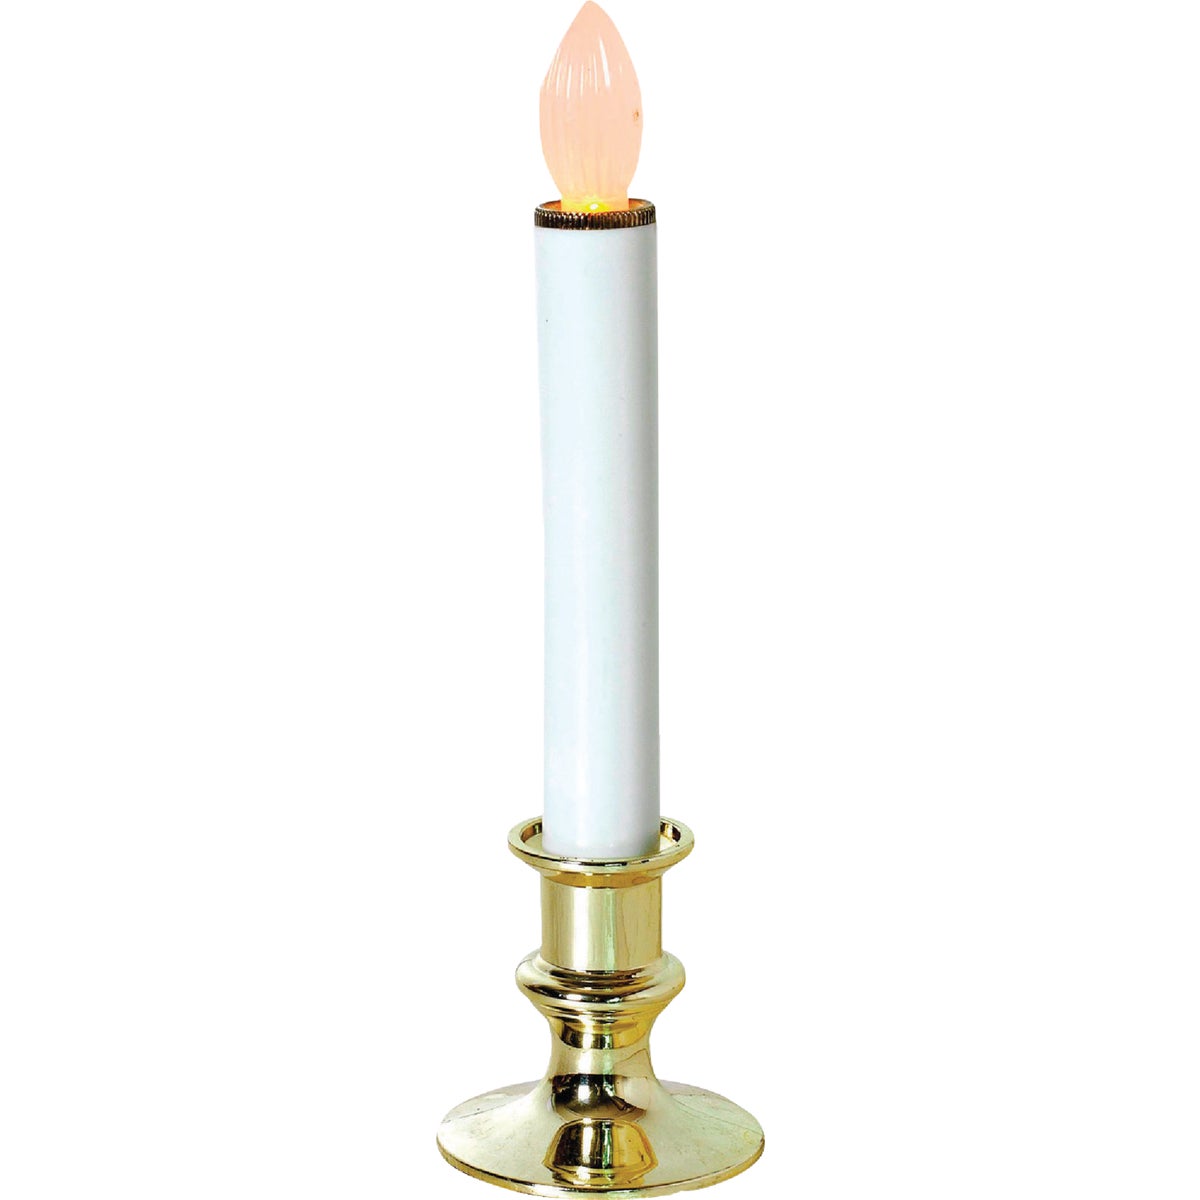 LED CANDLE WITH TIMER